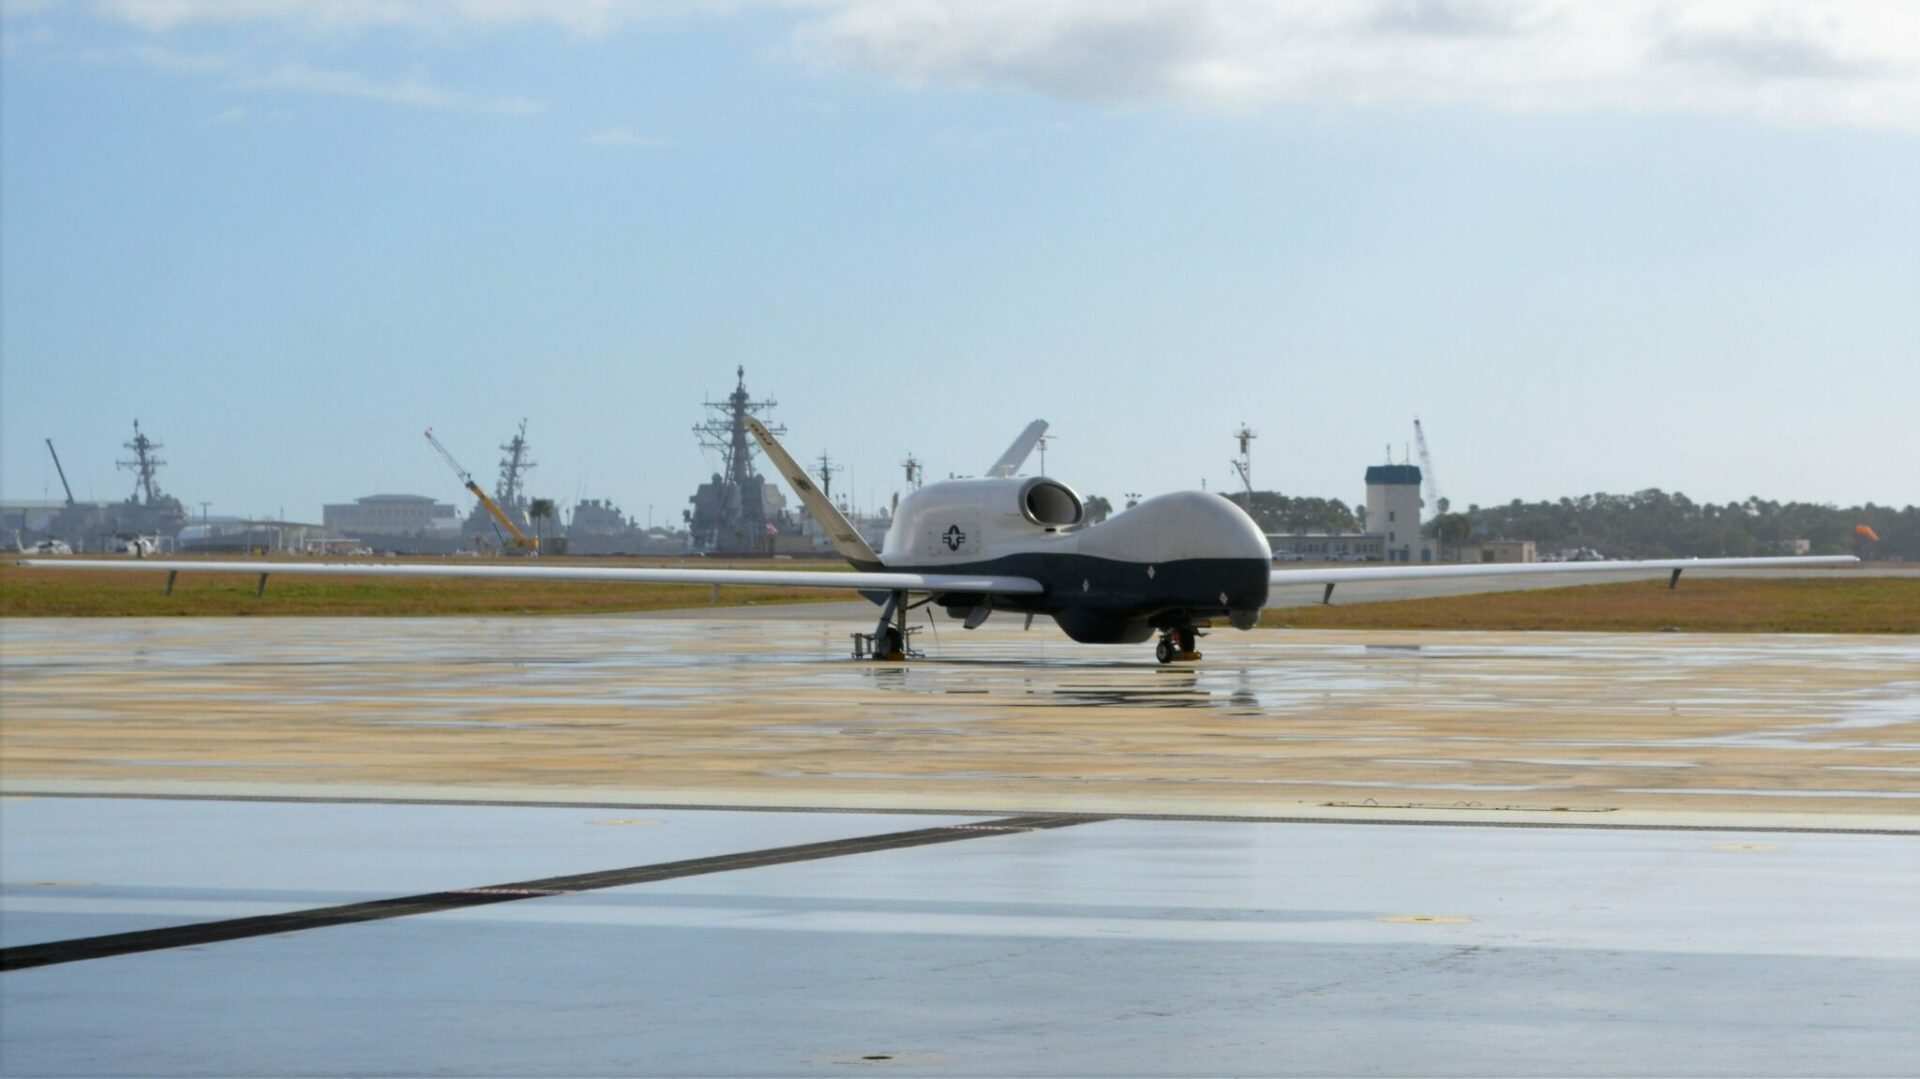 MQ-4C Triton drone arrives at Mayport, 1 of 4 at new Navy squadron in Jacksonville